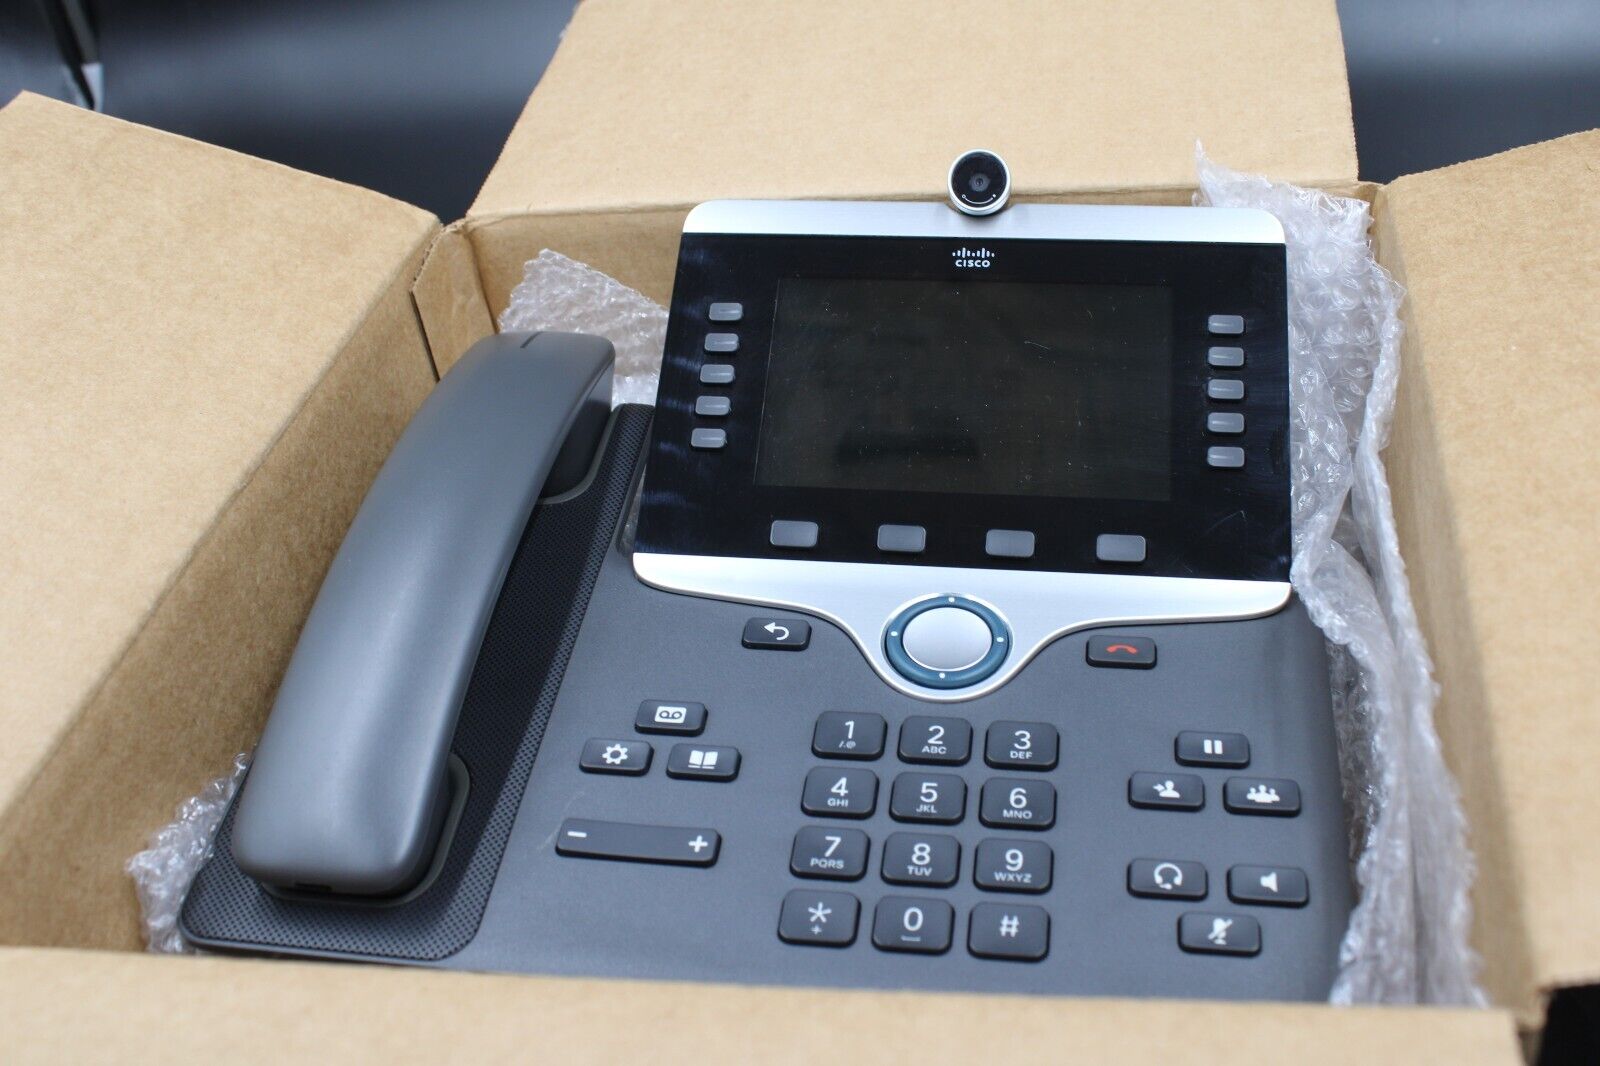 Cisco 8845 CP-8845-K9 5-Line VoIP Black Conference Business IP Phone